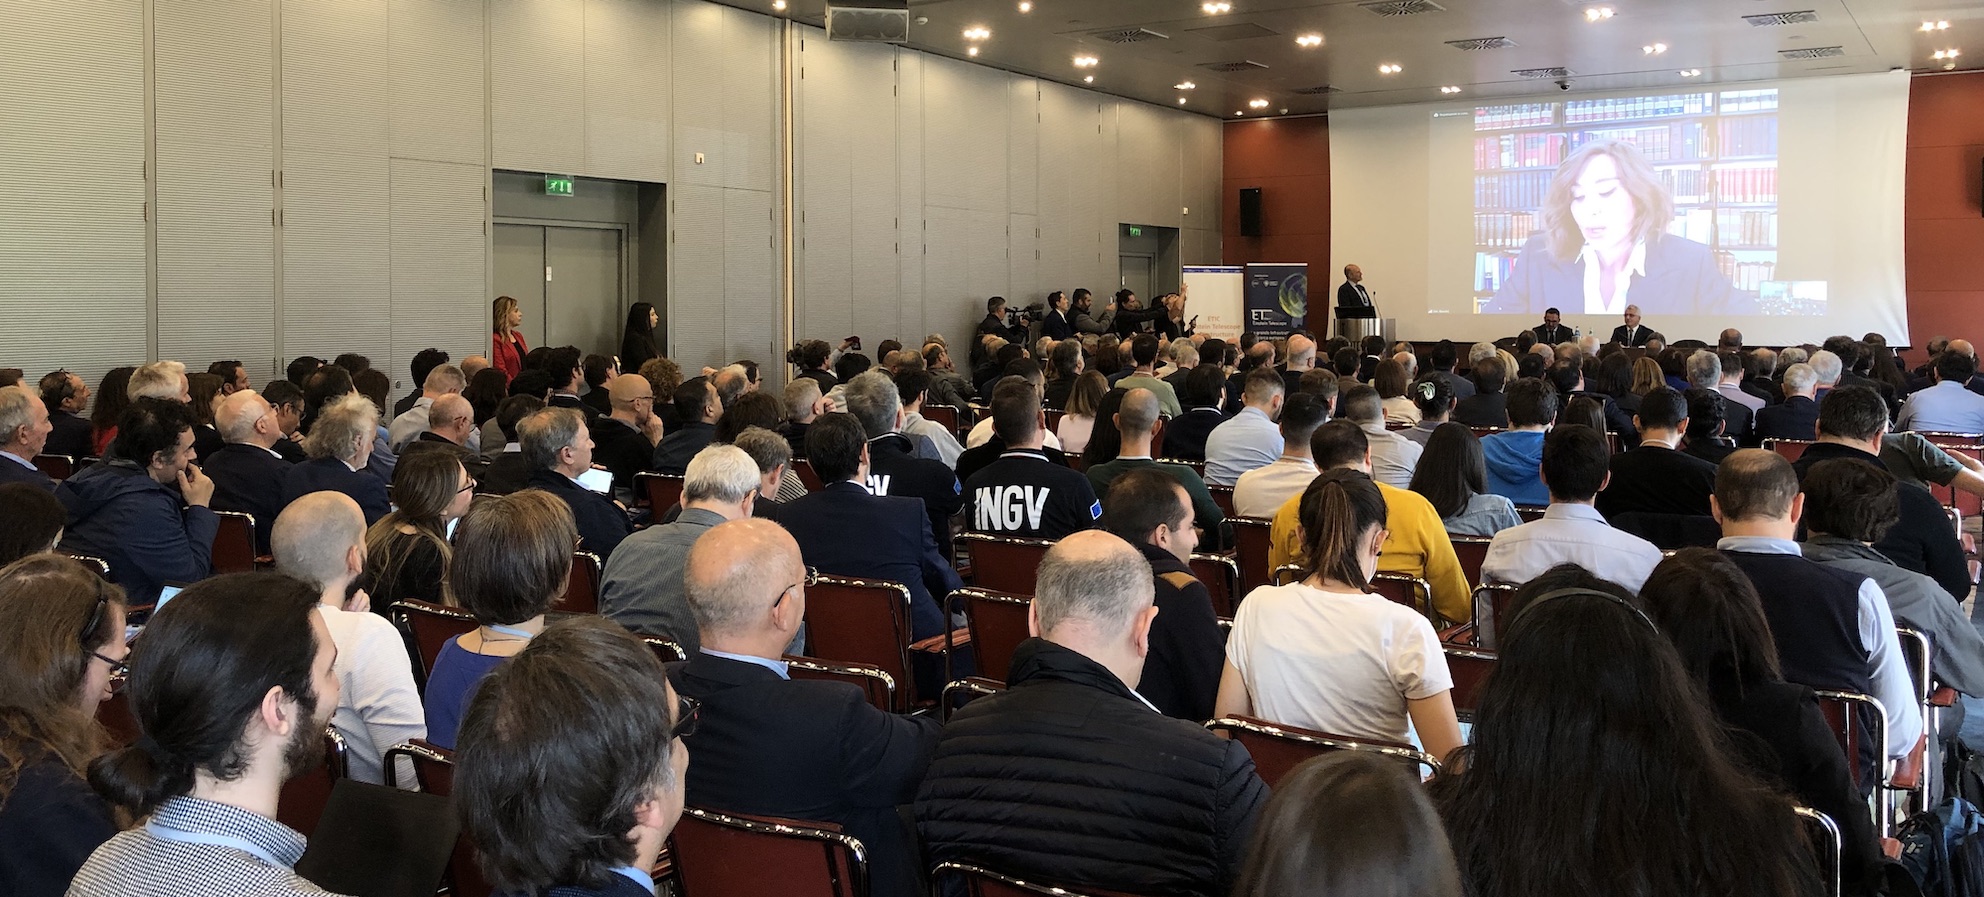 ETIC AND THE ITALIAN CANDIDACY LAUNCHED IN CAGLIARI